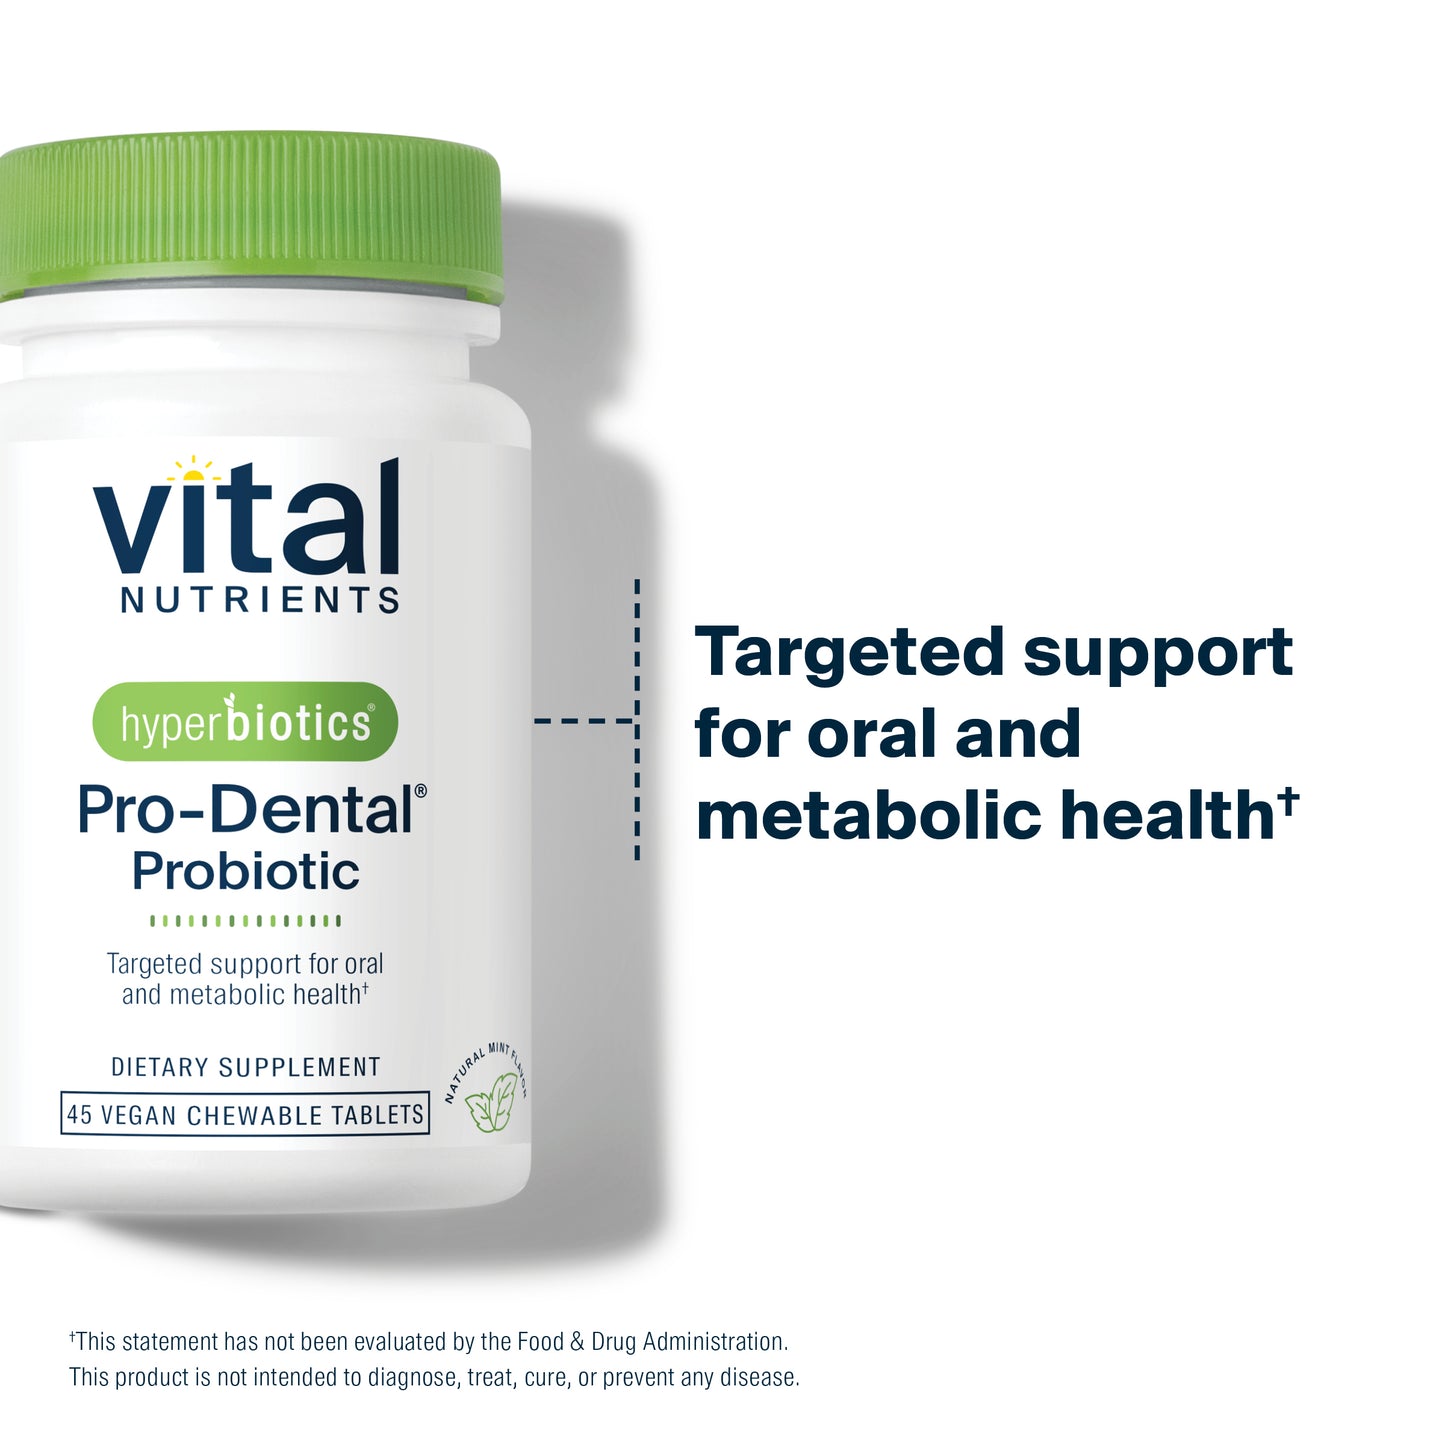 Hyperbiotics Pro-Dental Probiotic 45 chewable tablets targeted support for oral and metabolic health.*